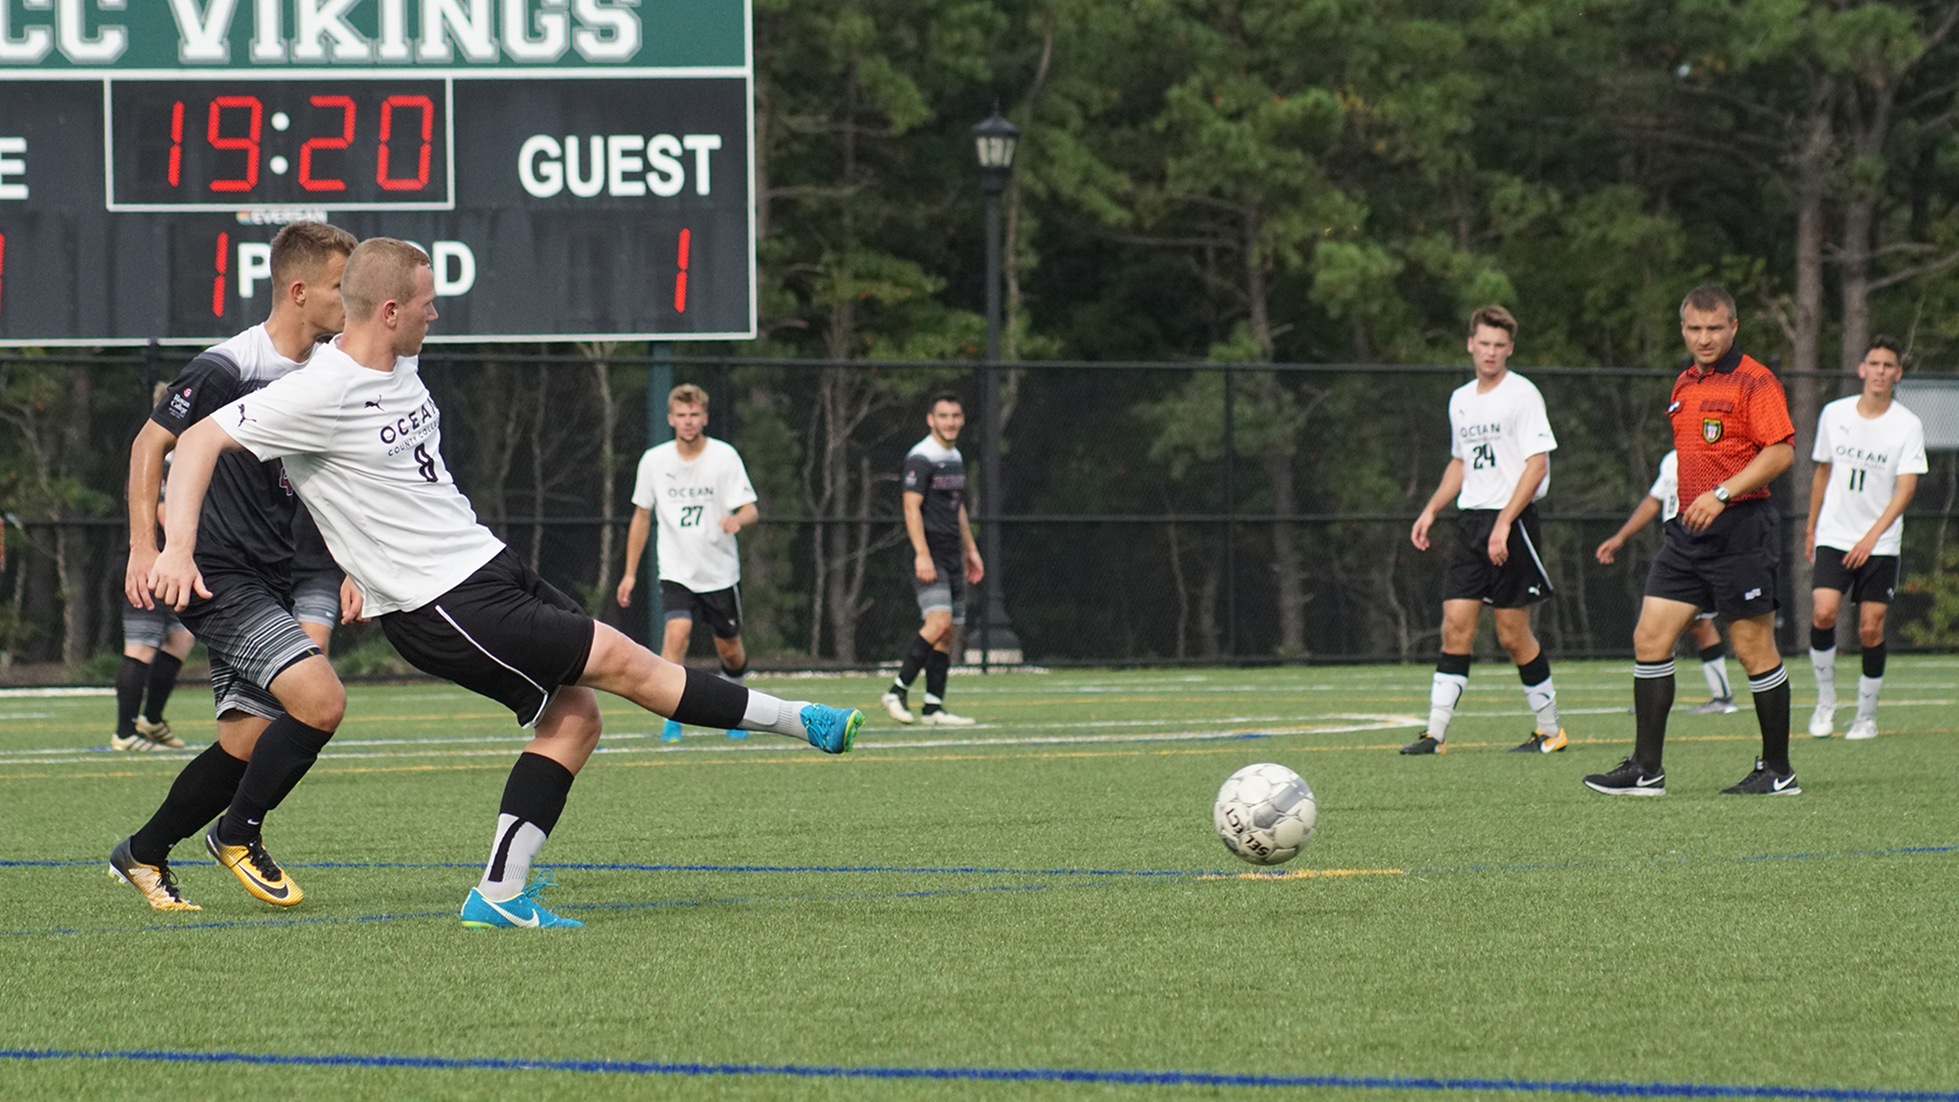 Vikings Shut Out County College of Morris, 3-0 in 1st Round of Region XIX Playoffs